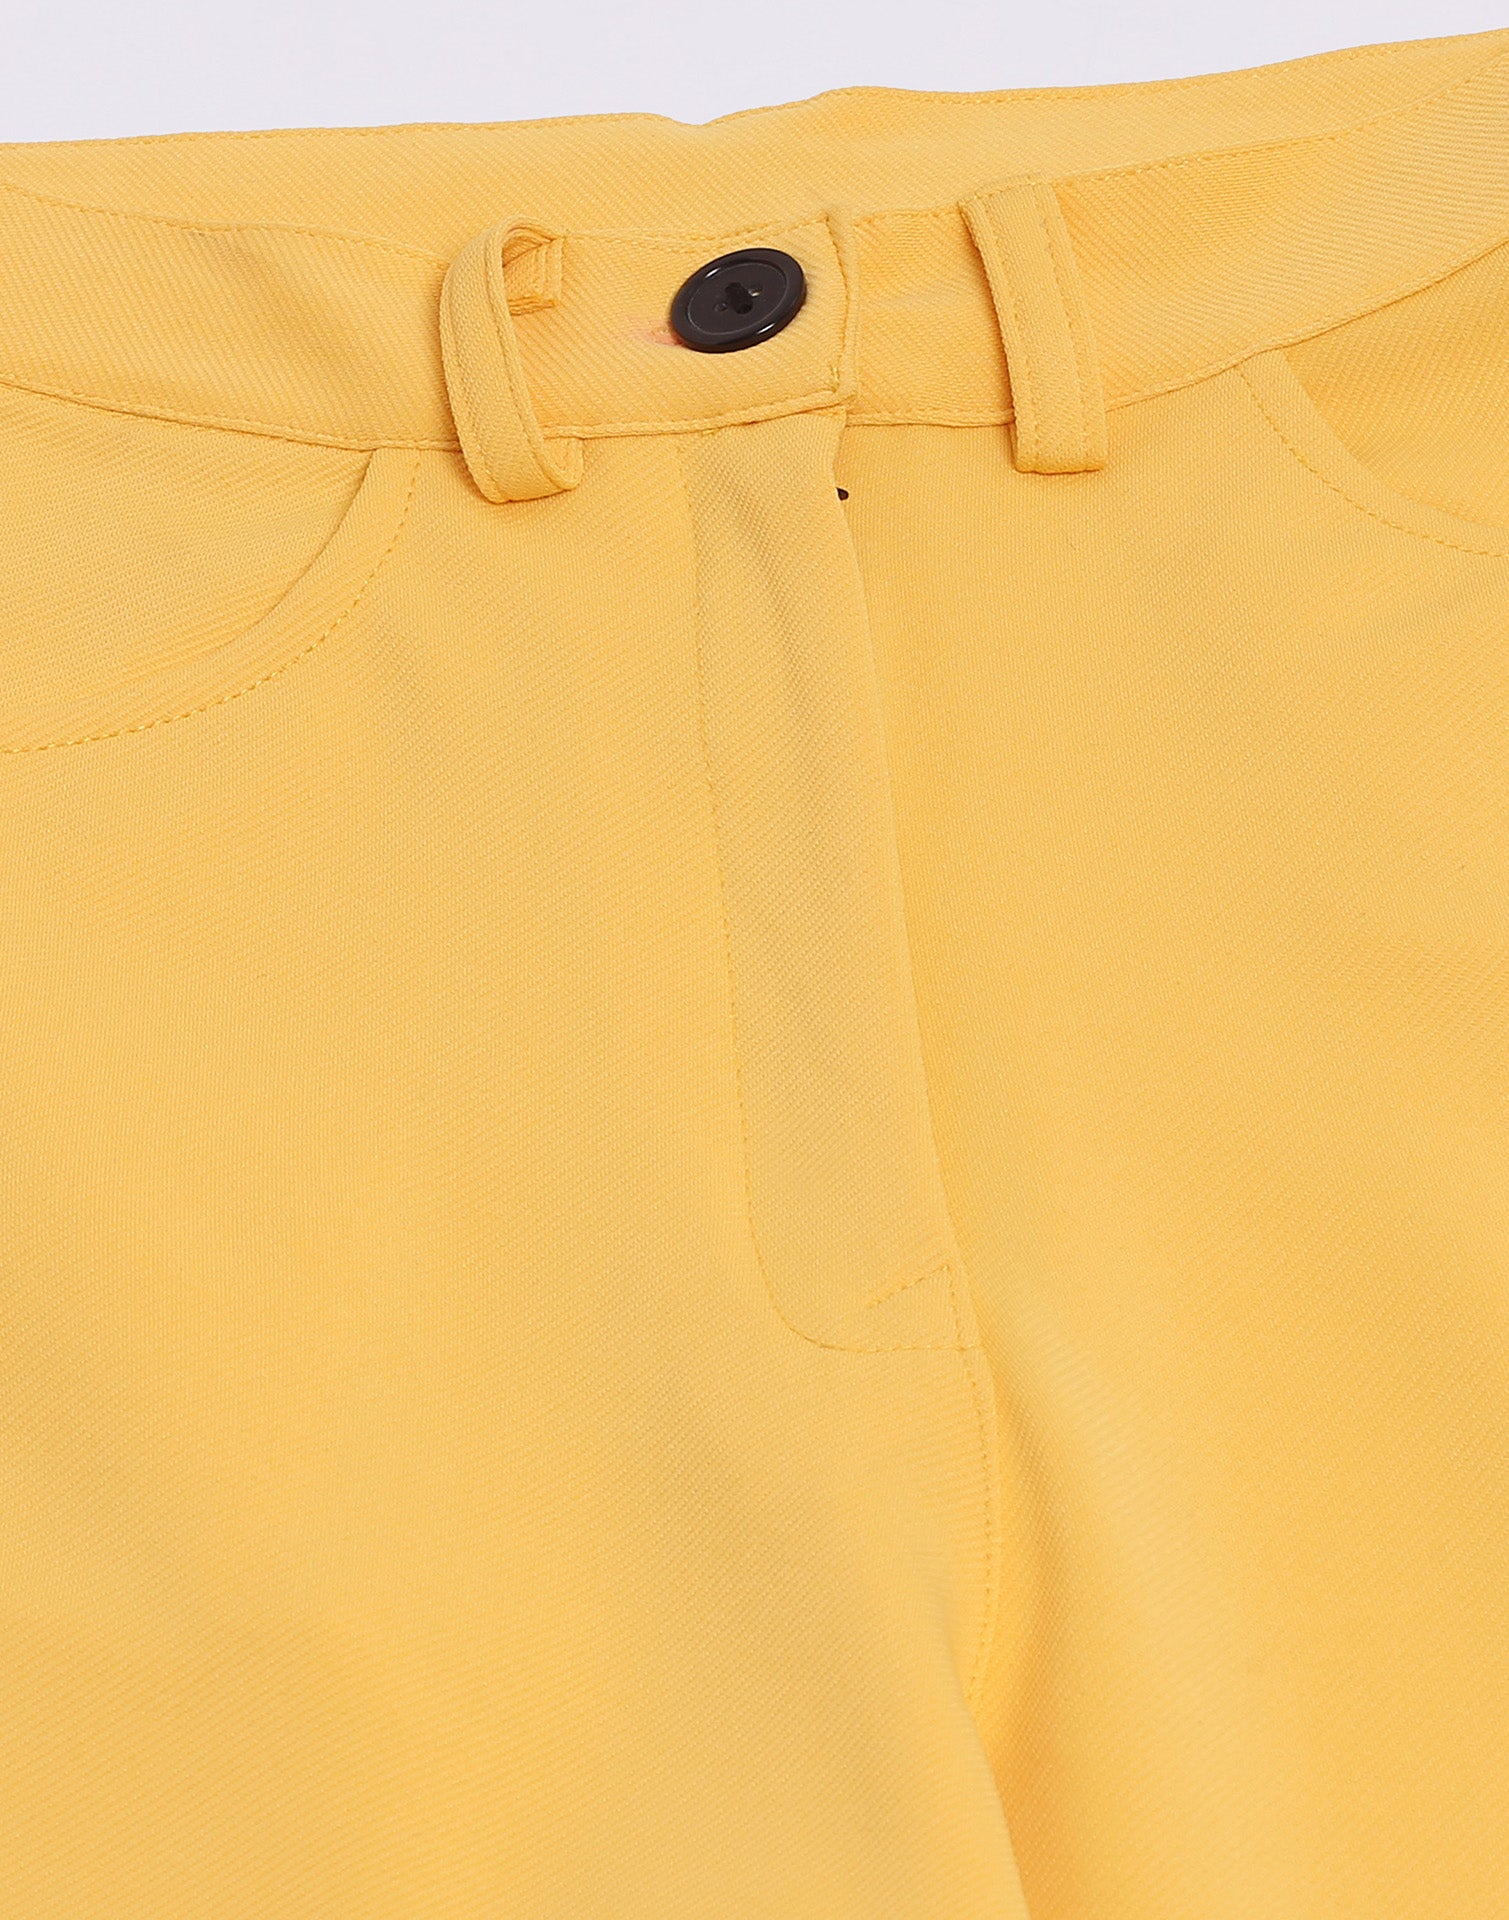 yellow pant combine | Combination pants, Mens outfits, Yellow pants